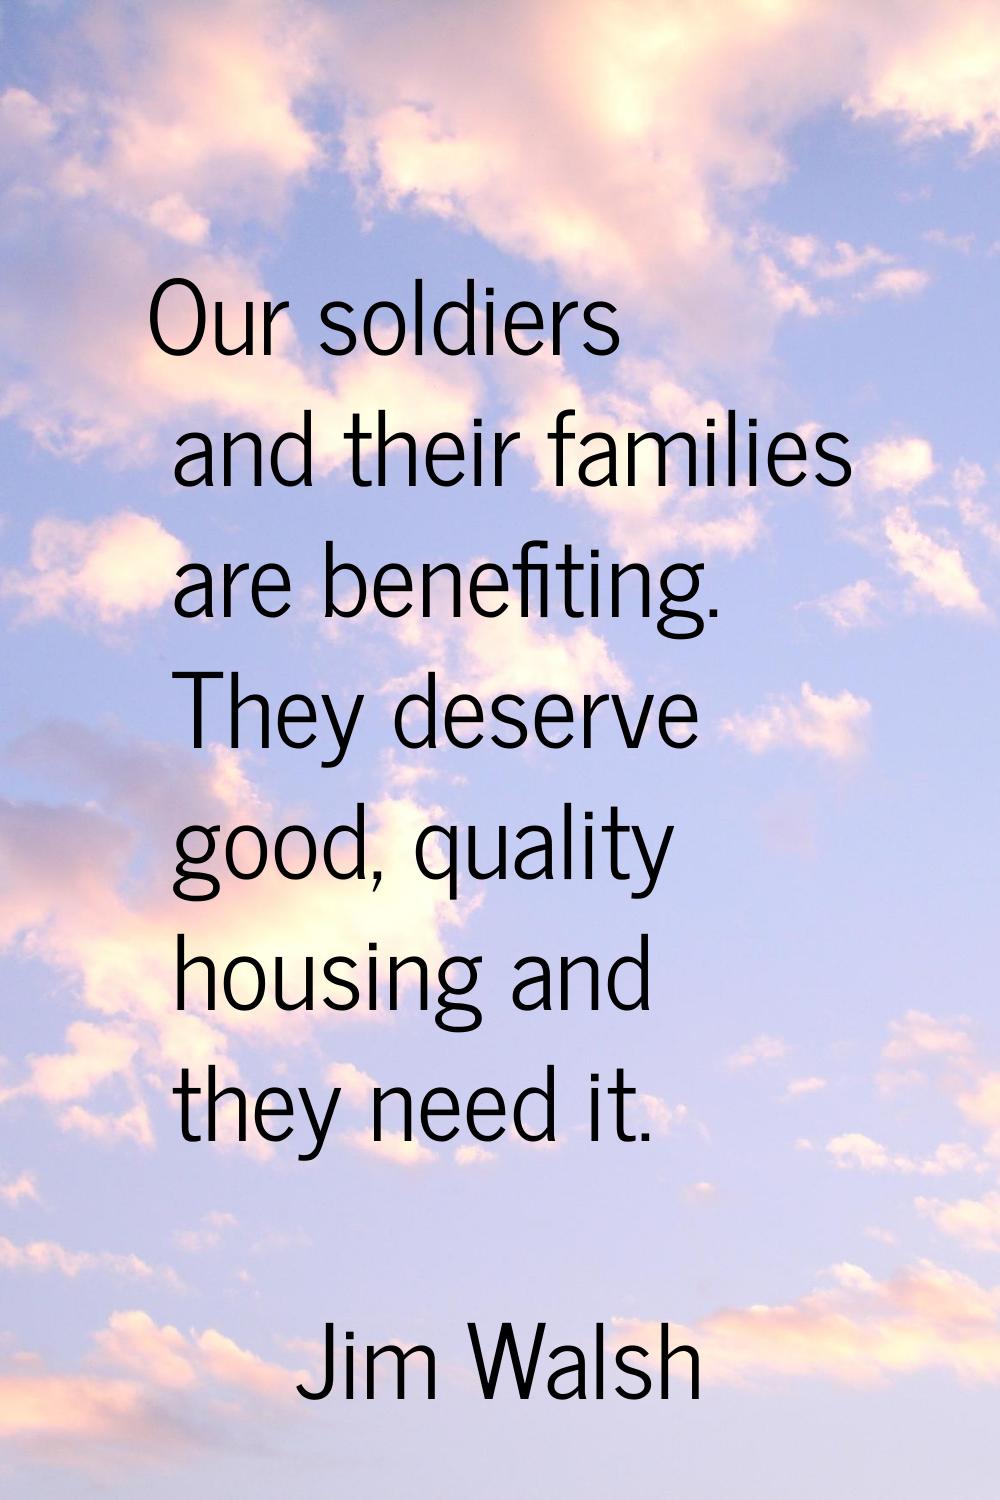 Our soldiers and their families are benefiting. They deserve good, quality housing and they need it